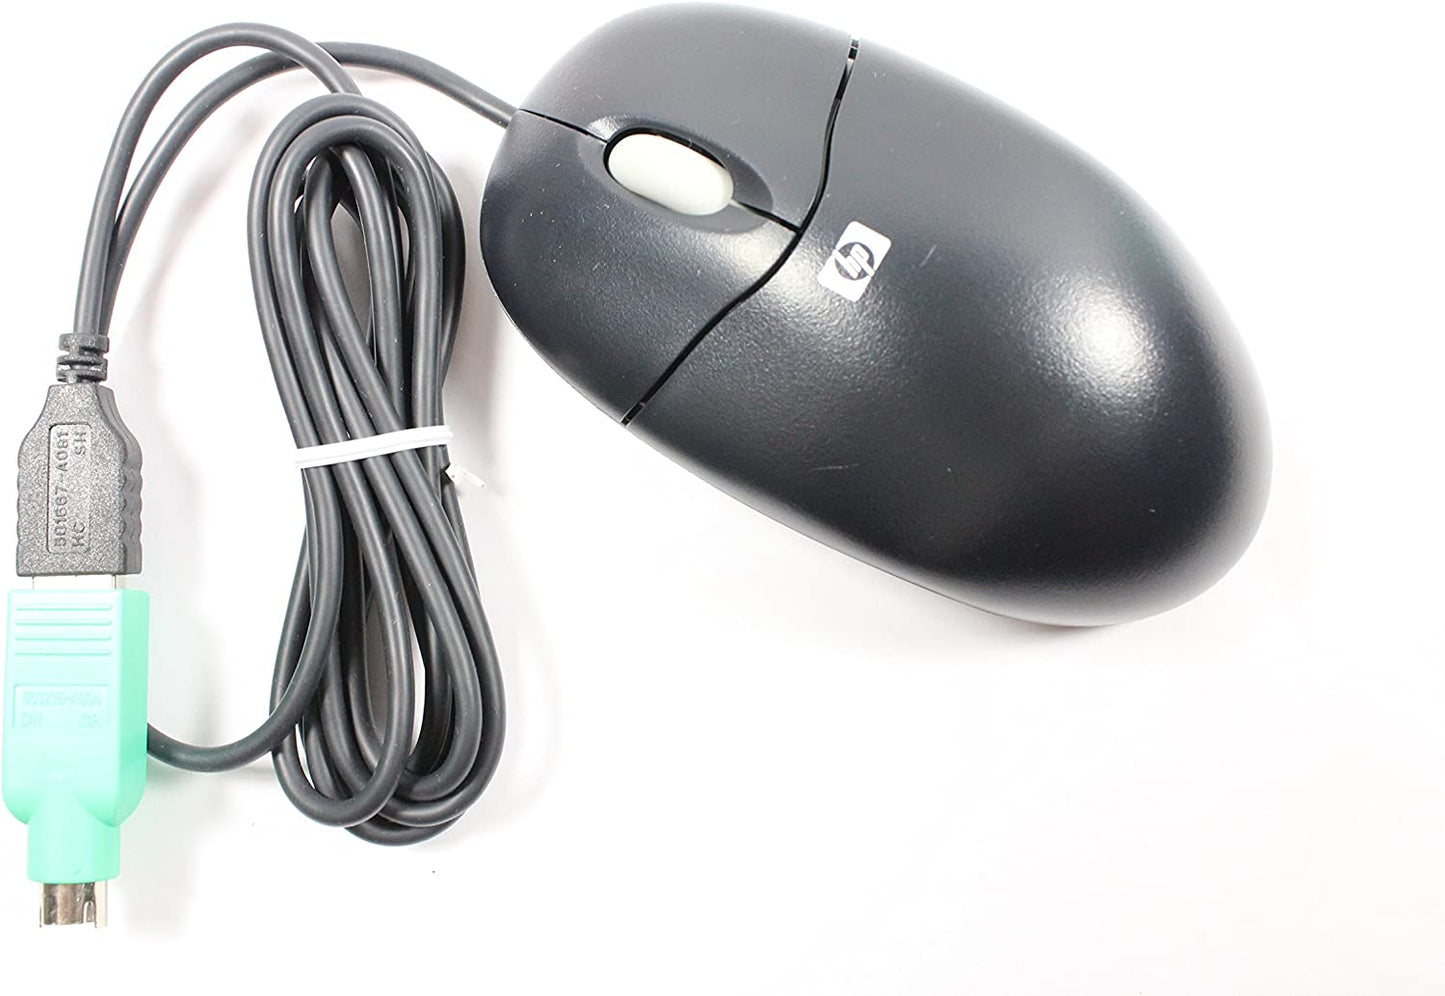 *Brand New* Genuine HP USB Wired Optical Scroll Mouse Mice Black 3-Button